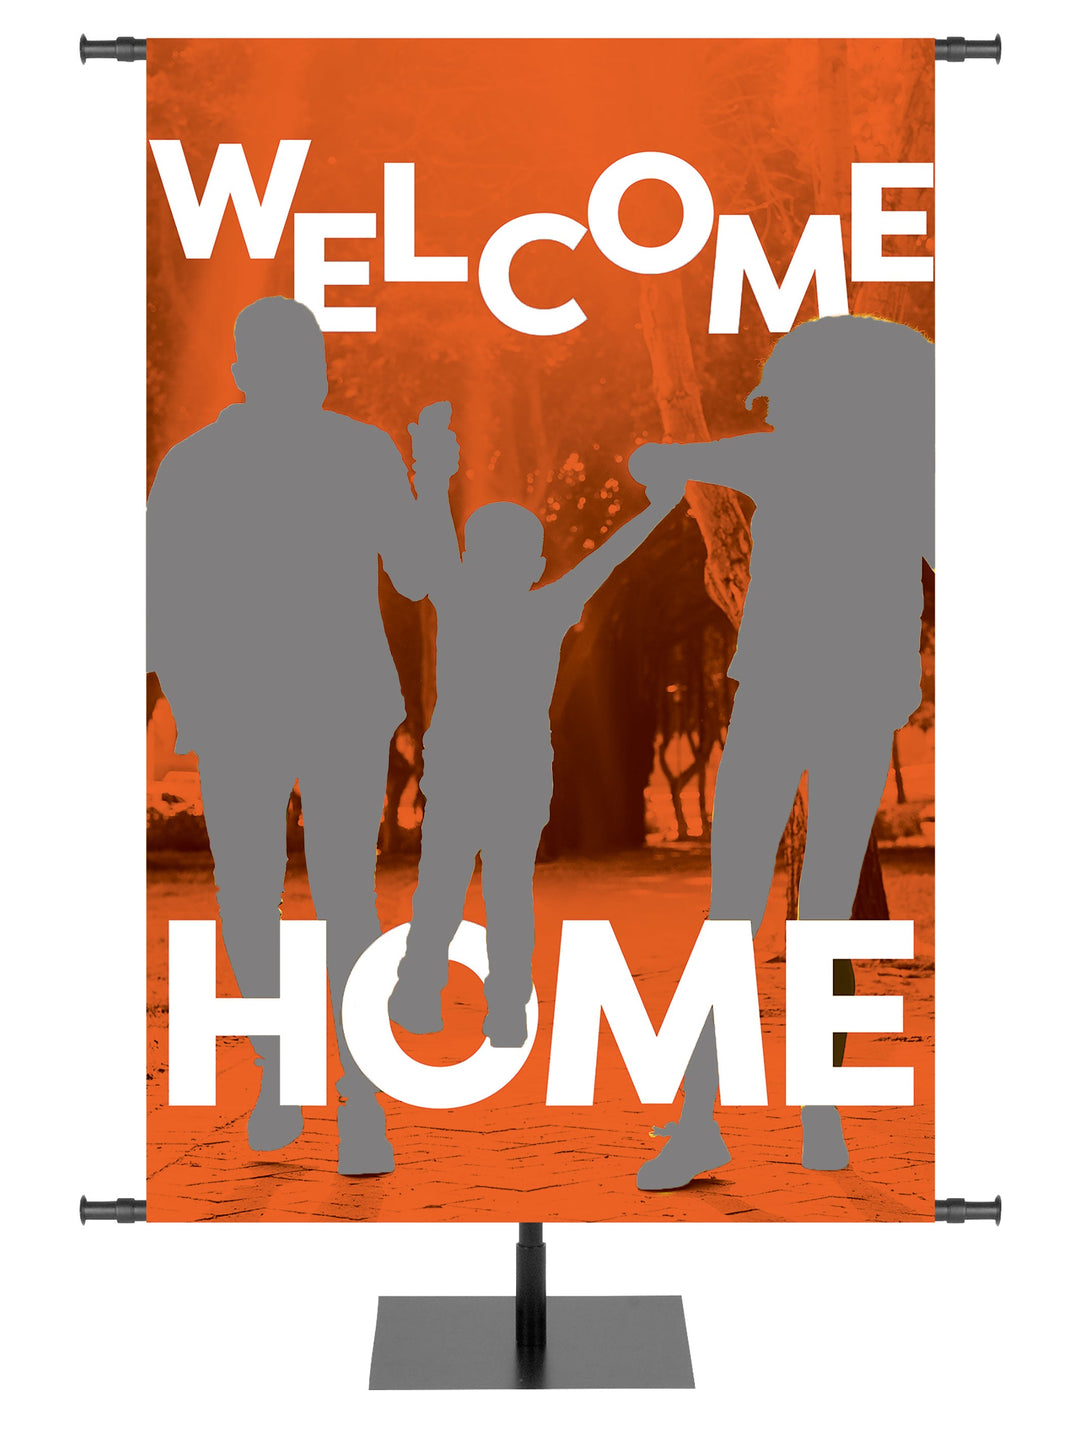 Custom Church Banner Community of Faith featuring worshipers welcoming visitors to church. Customize with images of members of your community.